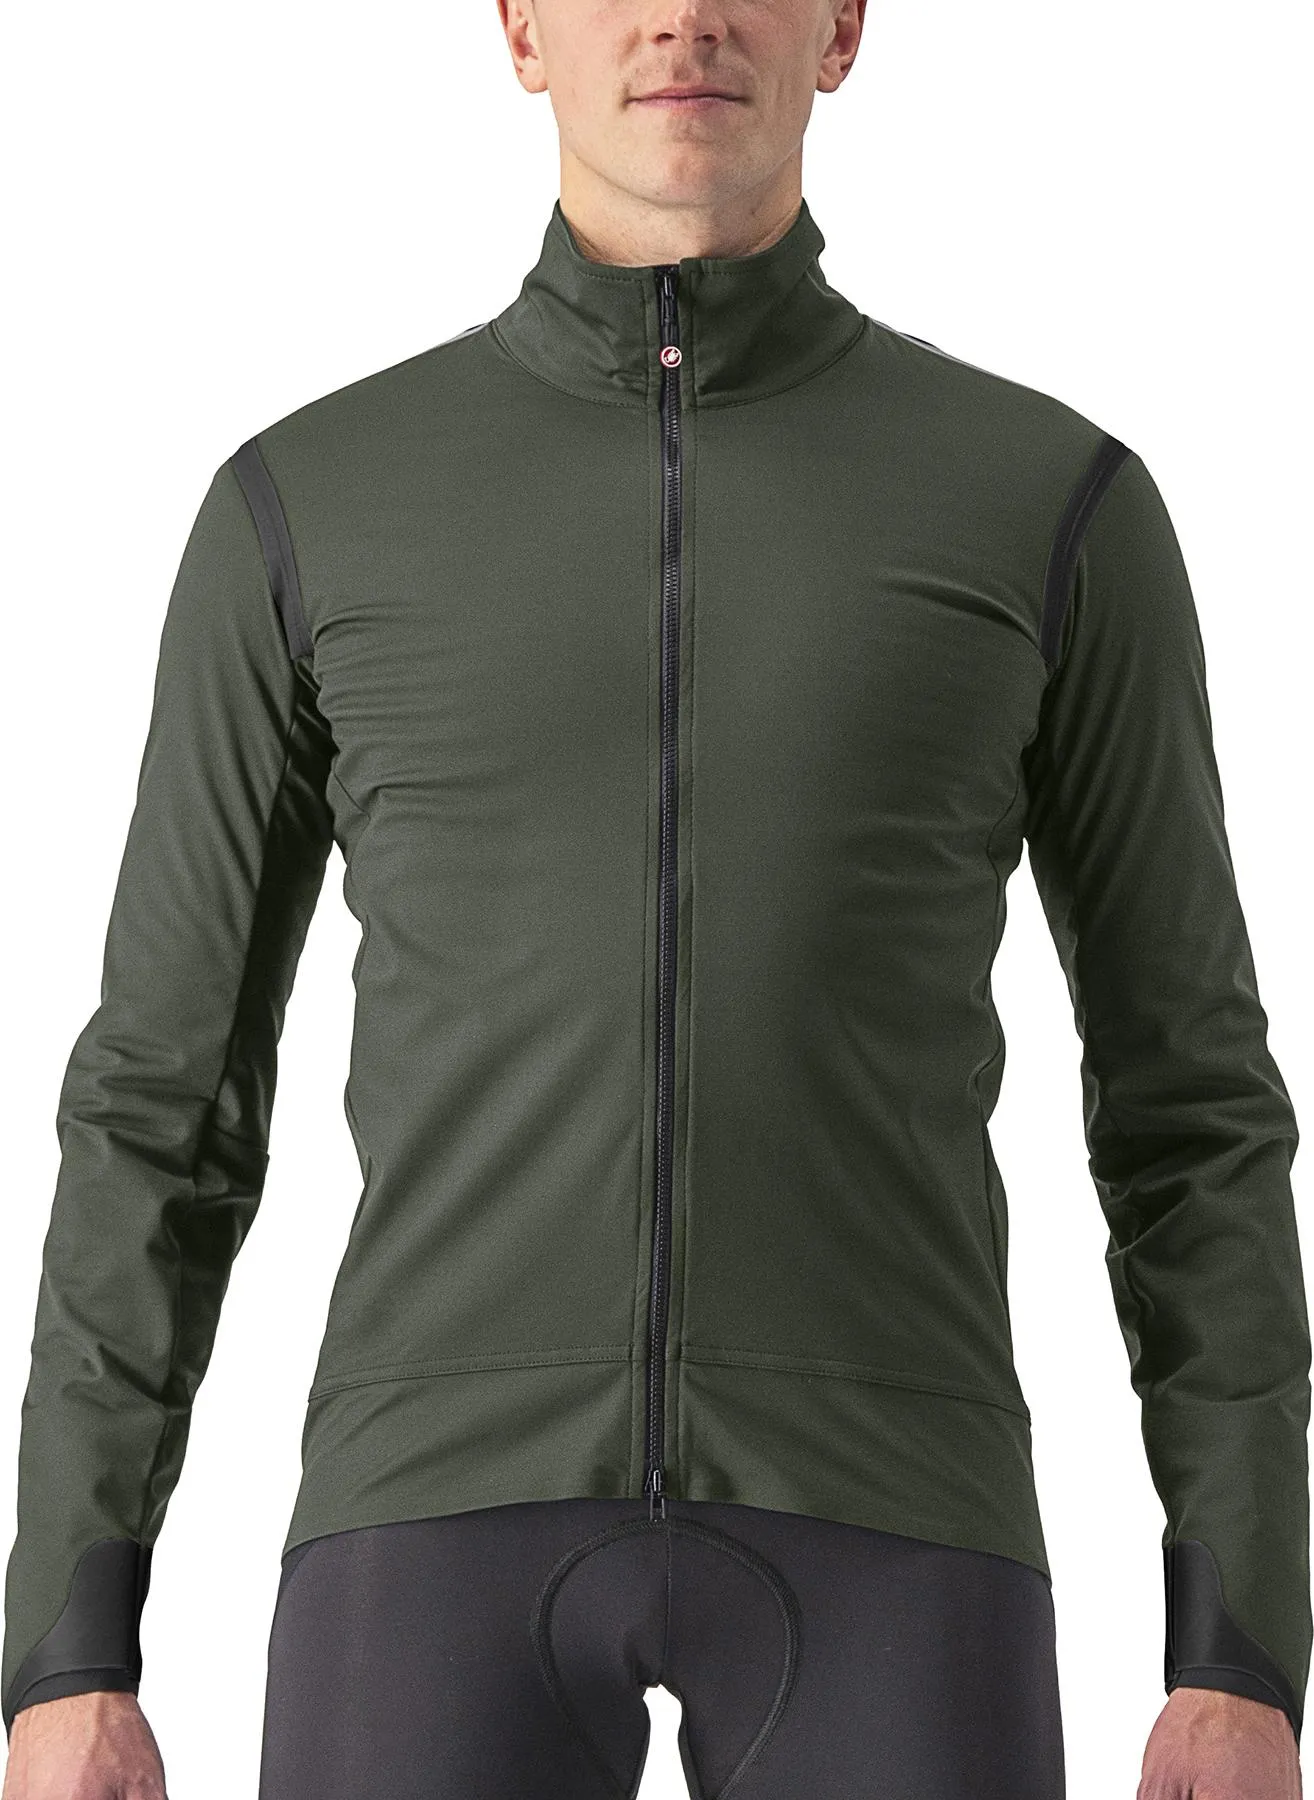  Alpha Ultimate Insulated Jacket, Military Green/Black/Electric Lime